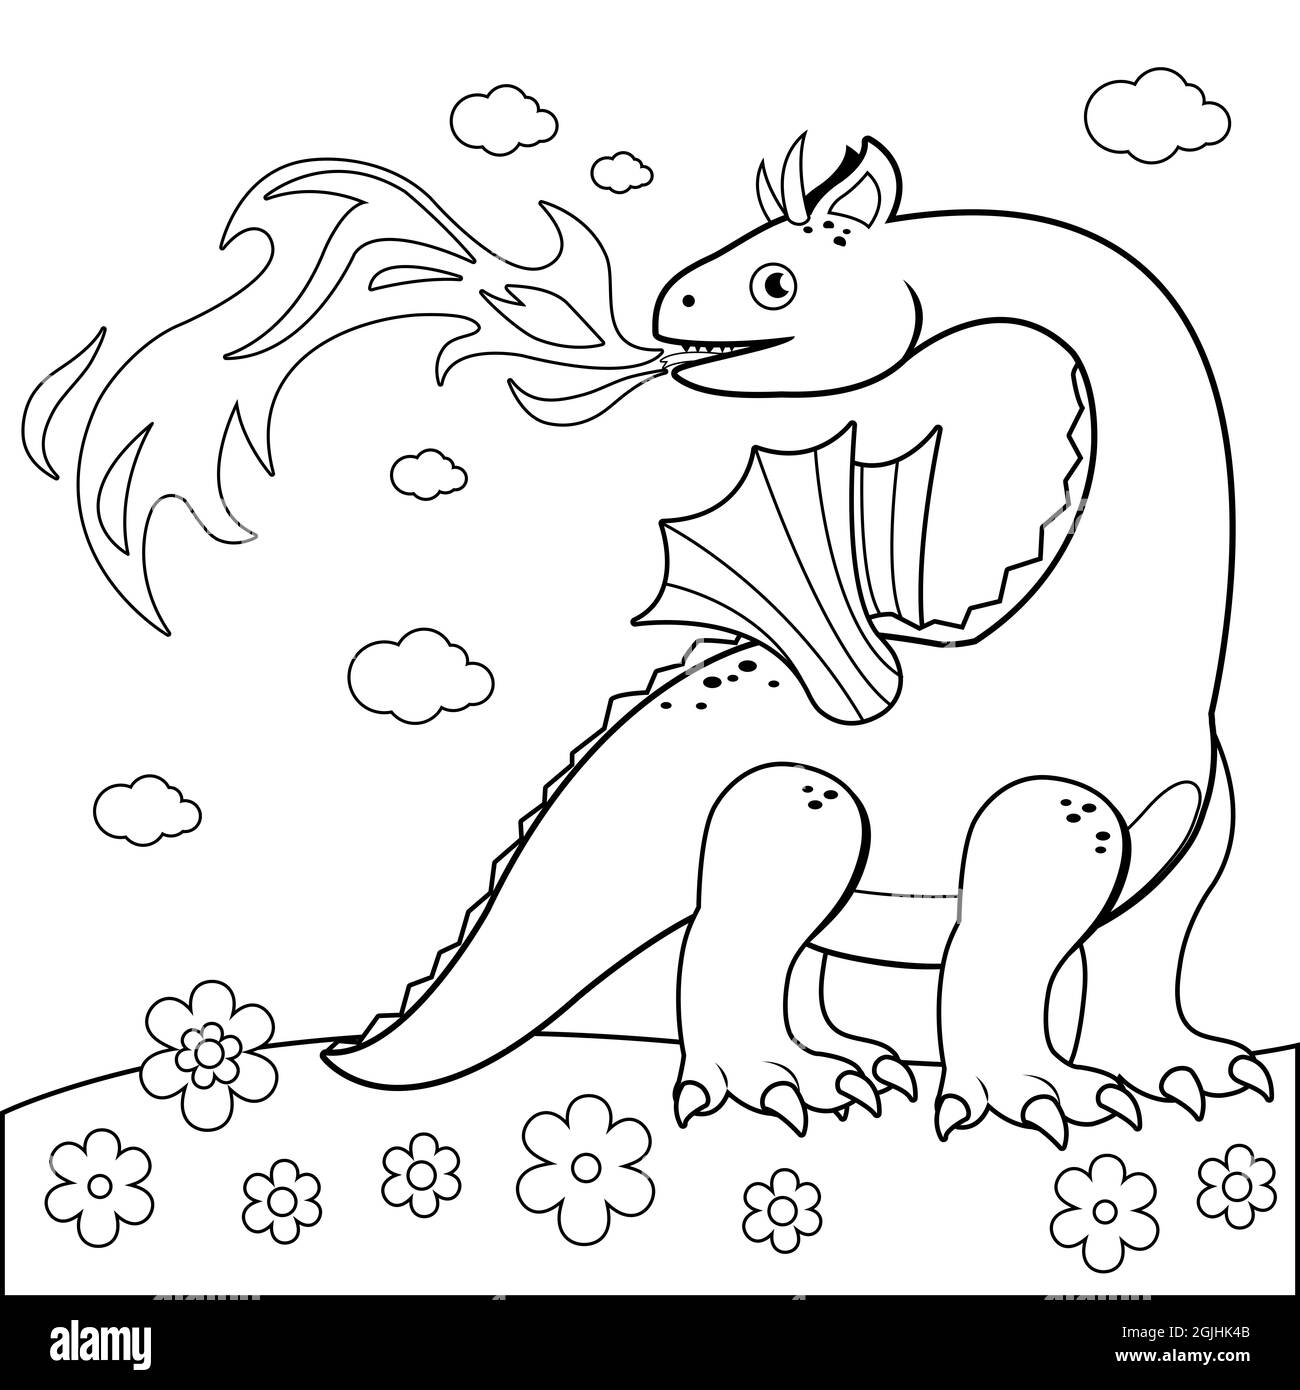 Fire breathing dragon. Black and white coloring page. Stock Photo